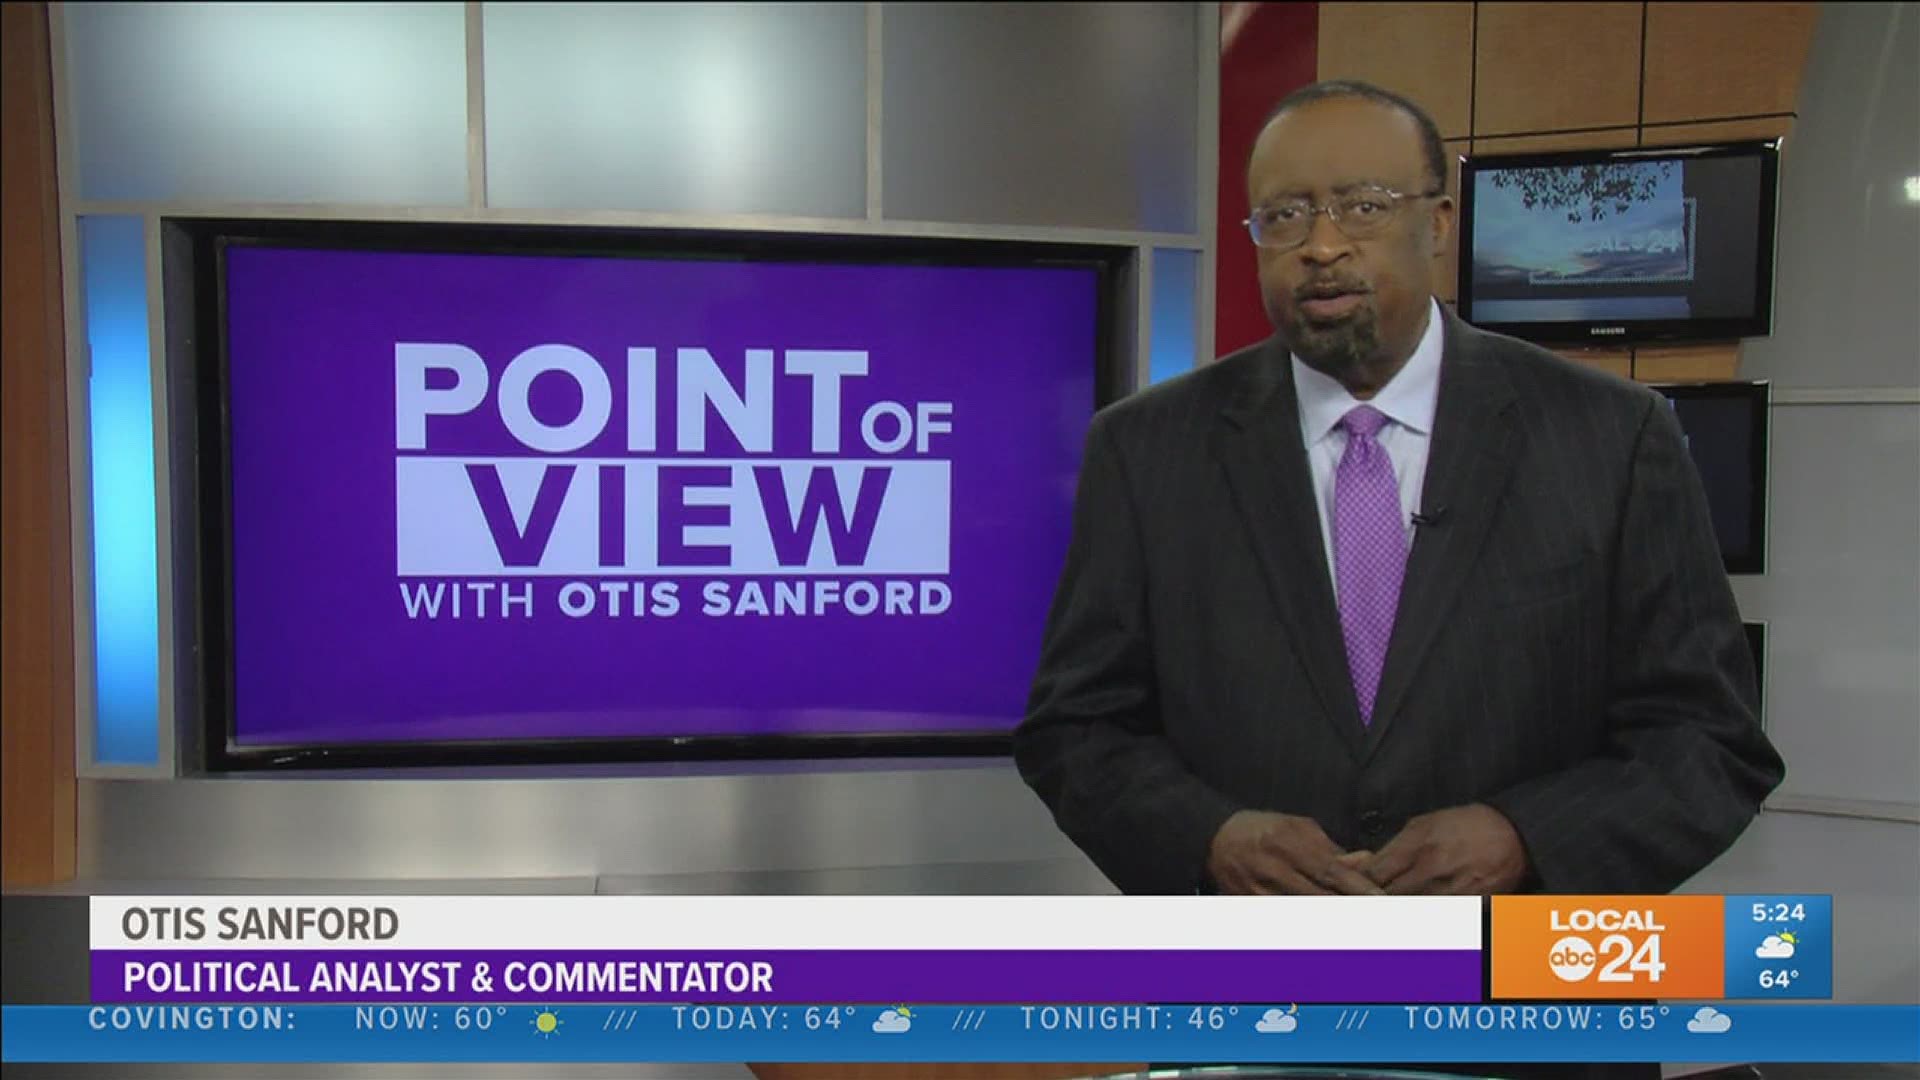 Local 24 News political analyst and commentator Otis Sanford shares his point of view on racism as a public health threat.